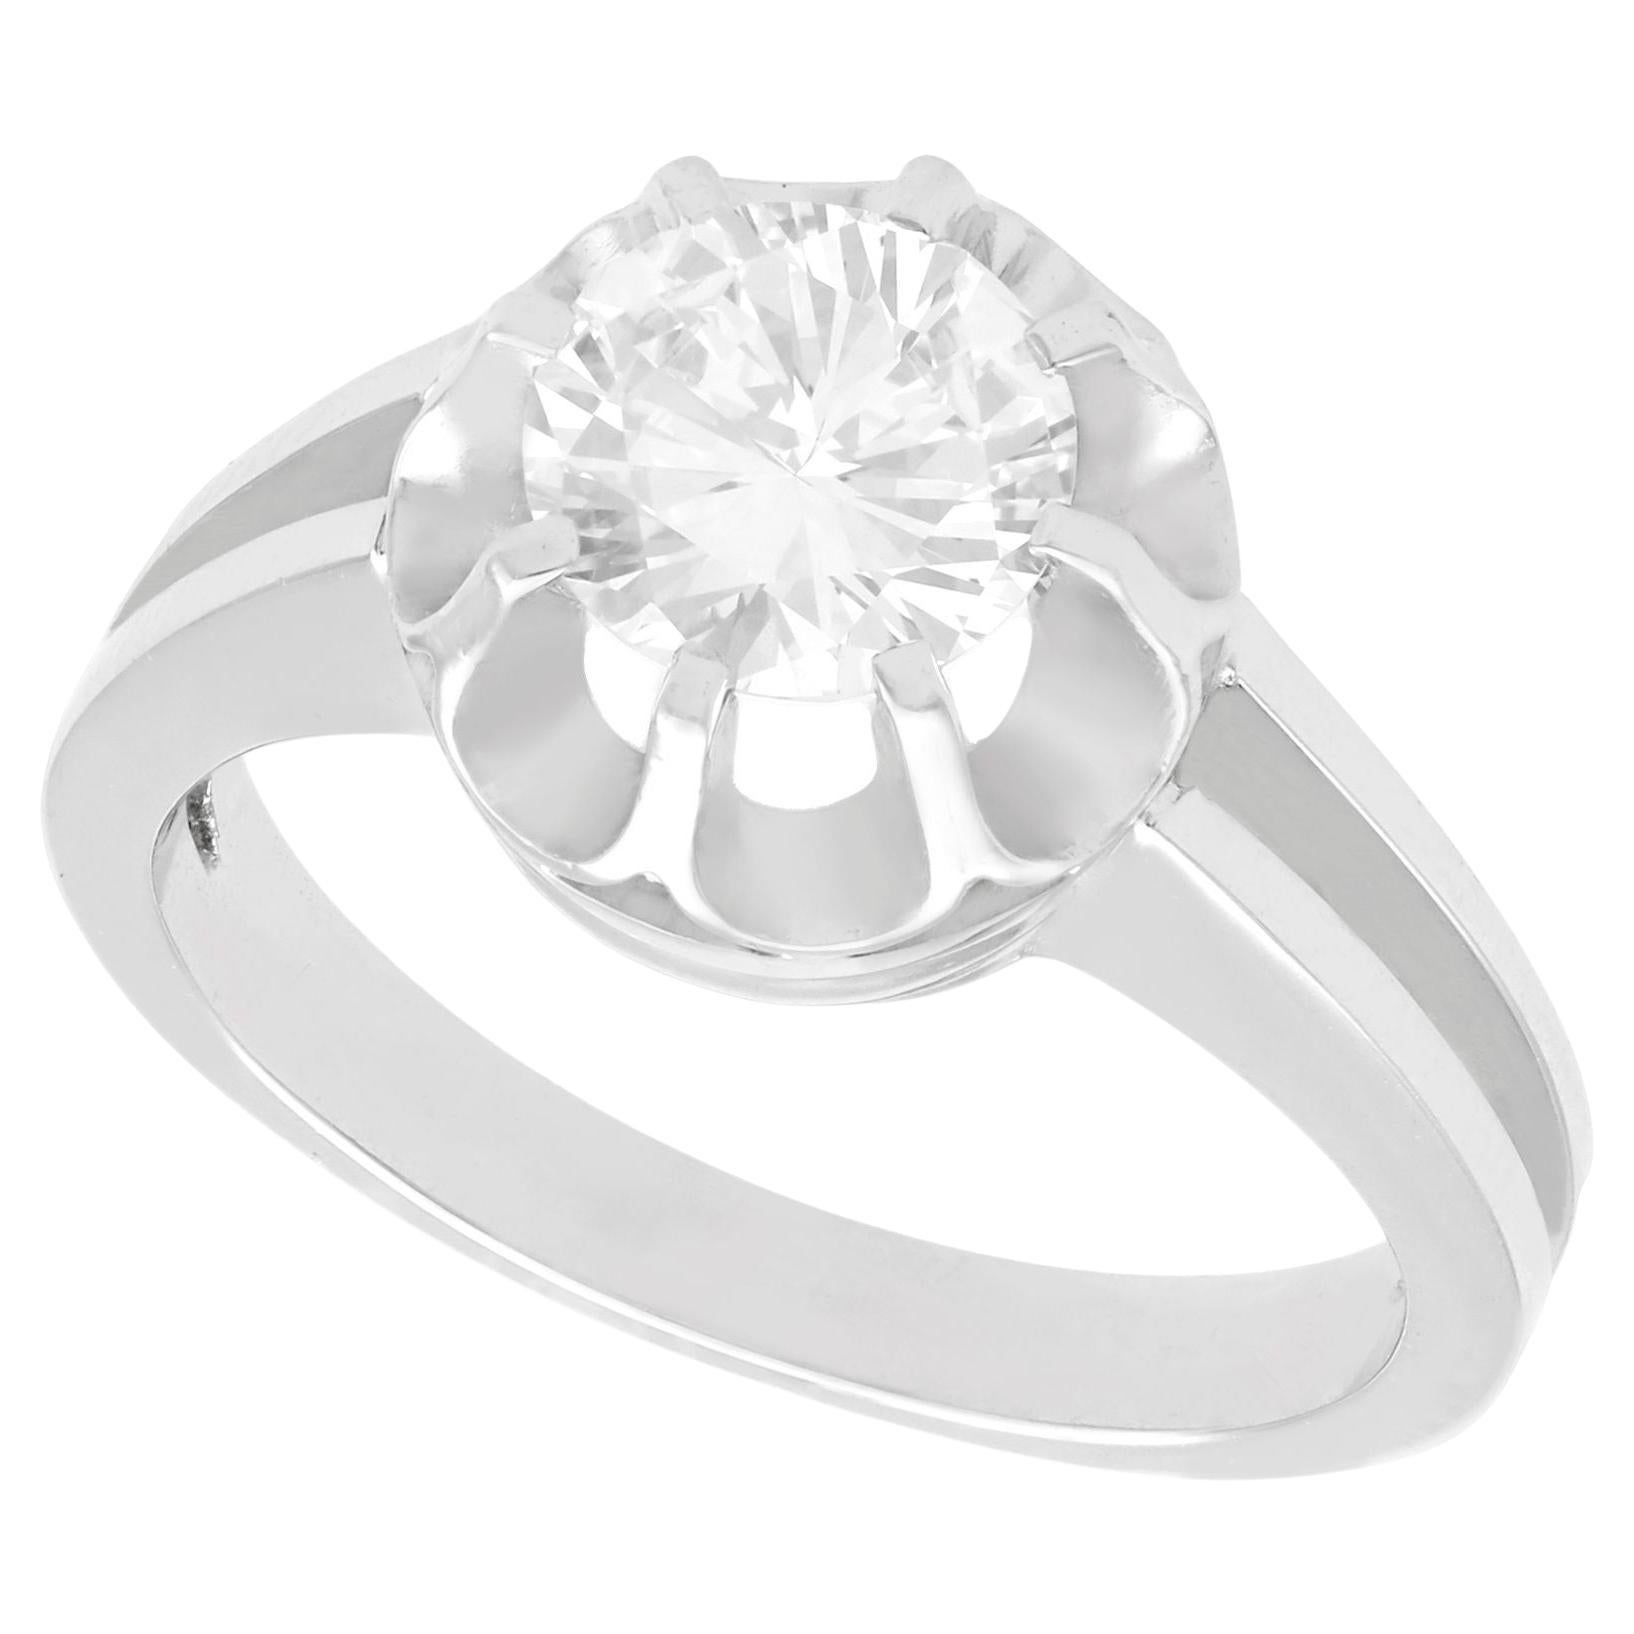 1930s, 1.05 Carat Diamond White Gold Solitaire Engagement Ring For Sale